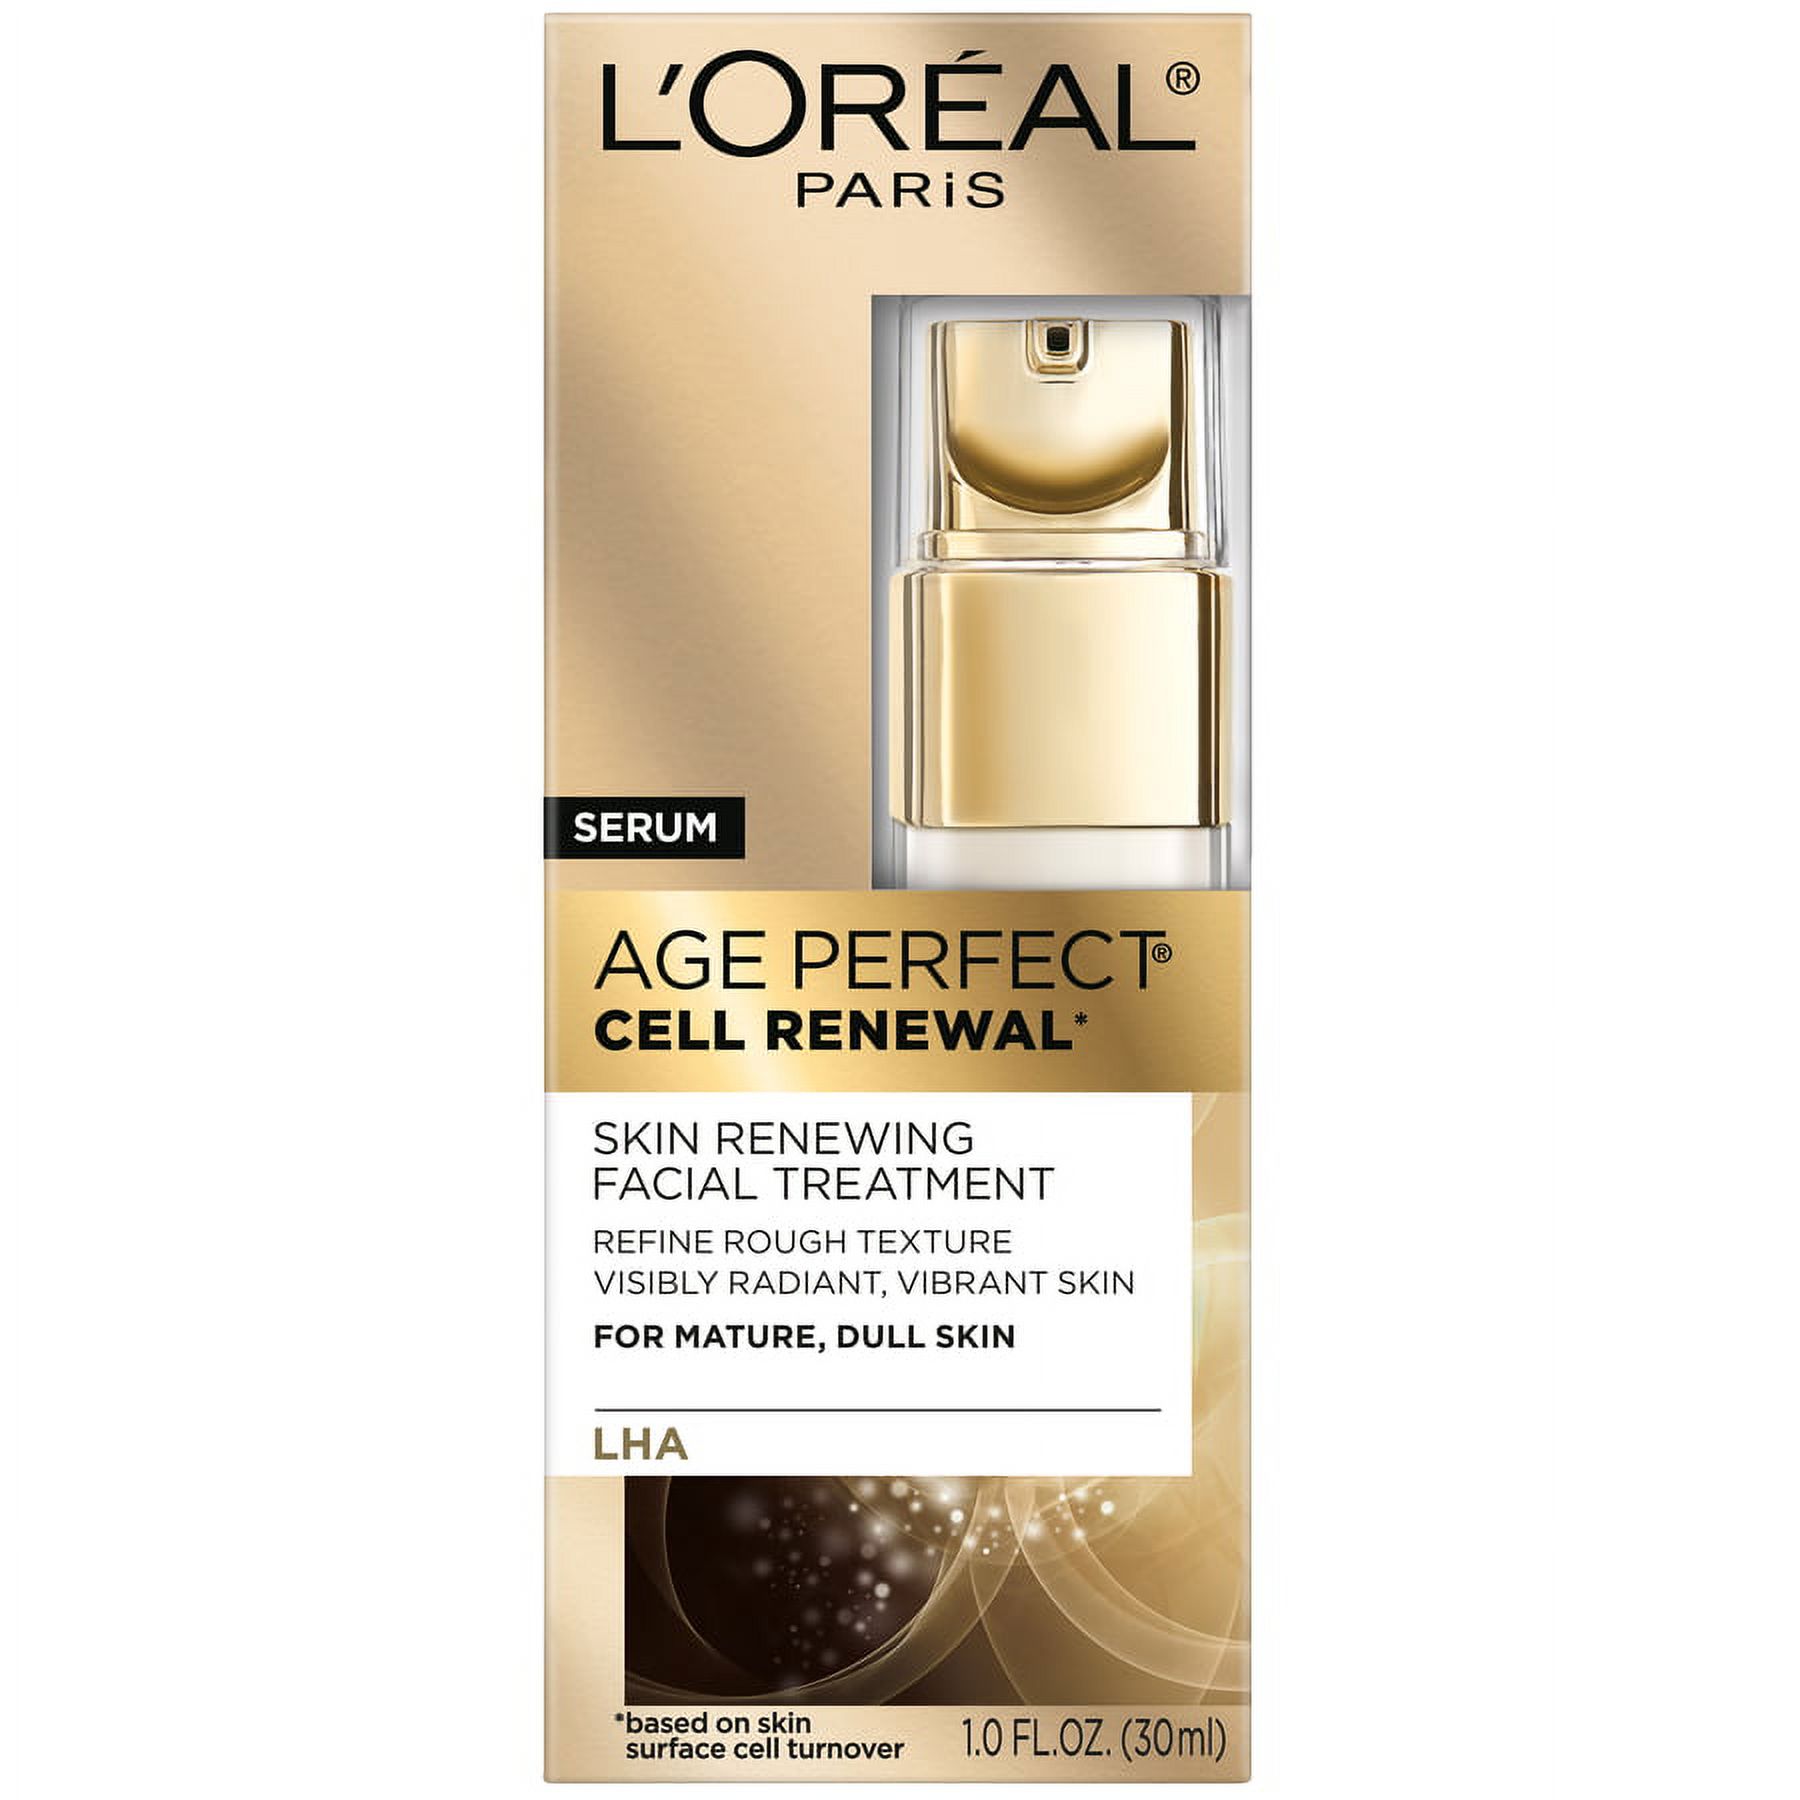 L'Oreal Paris Age Perfect Cell Renewal* Golden Face Serum, Anti-Aging, 1 fl. oz. - image 2 of 3